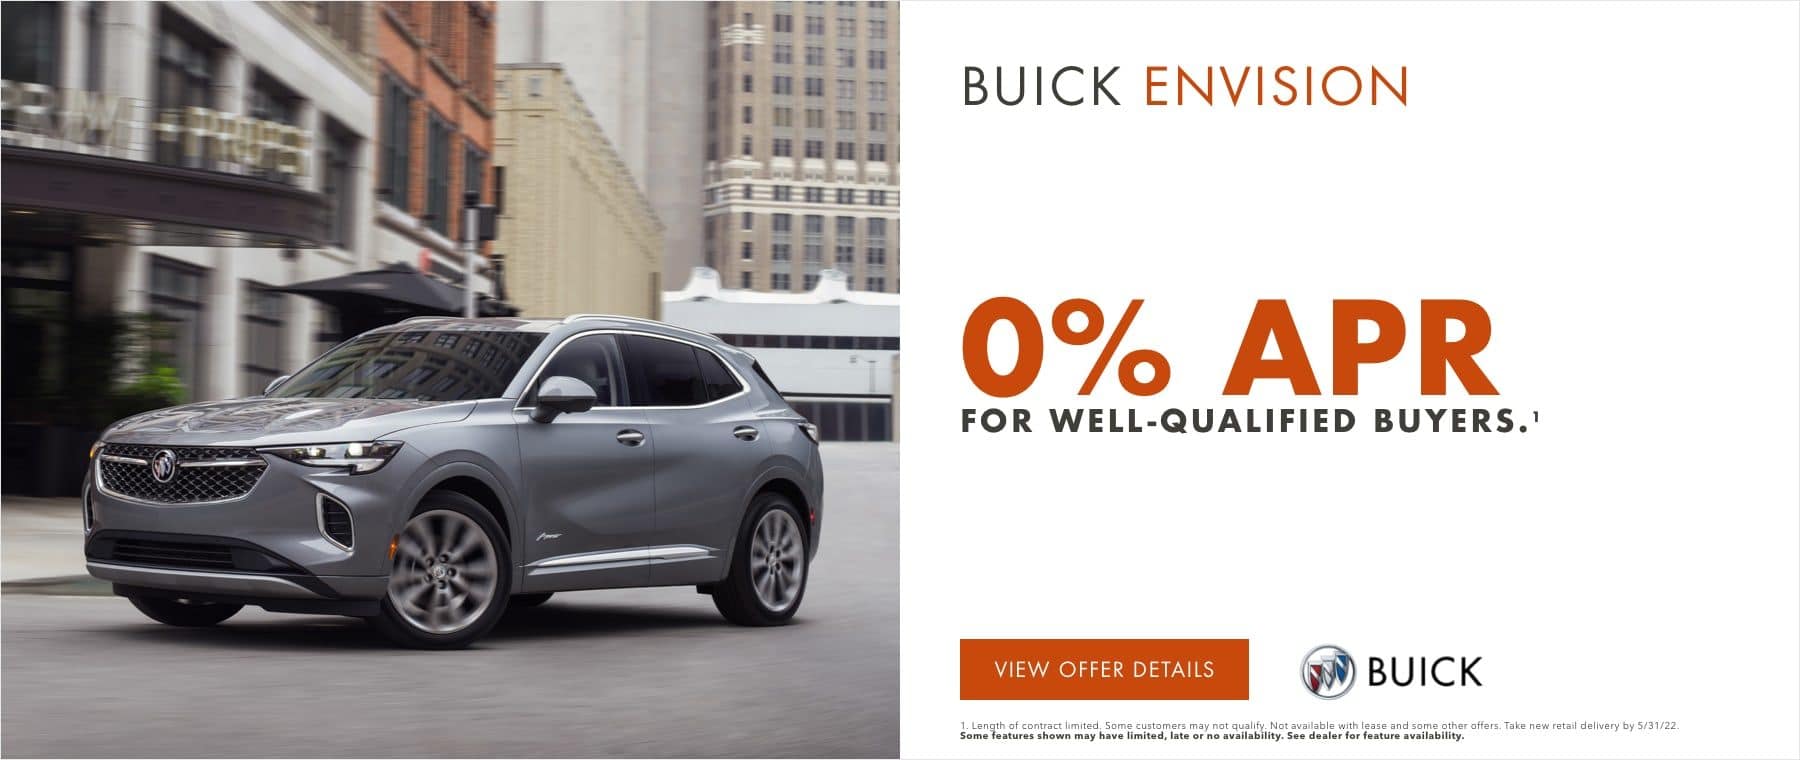 RES – BUICK – Pack – JUNE